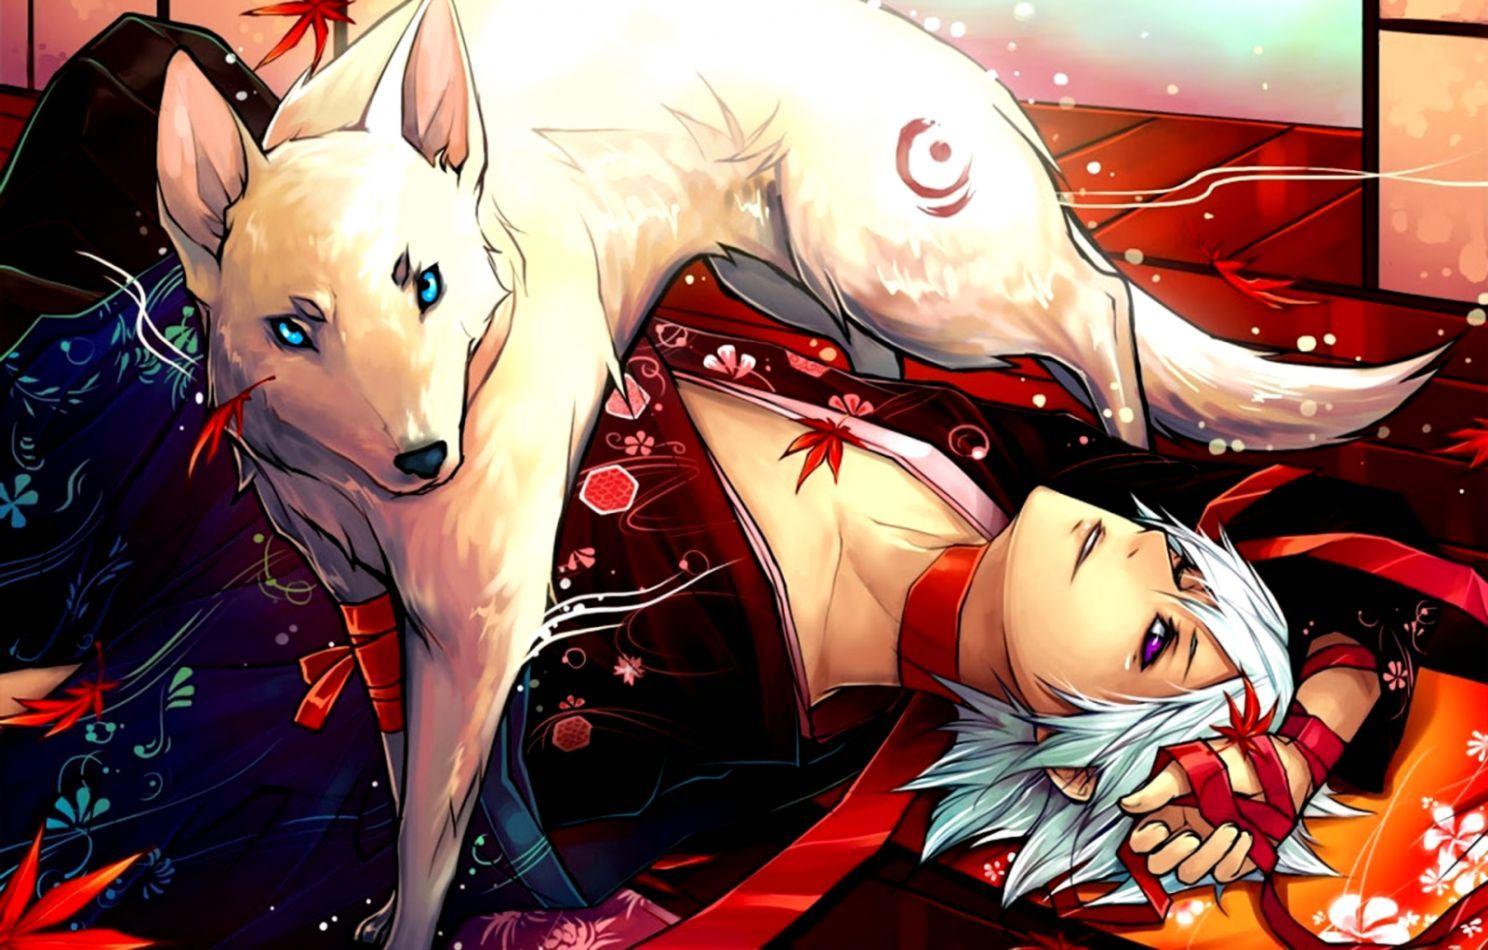 Izuna is a fox spirit from Yamato and  Valkyrie Connect  Facebook